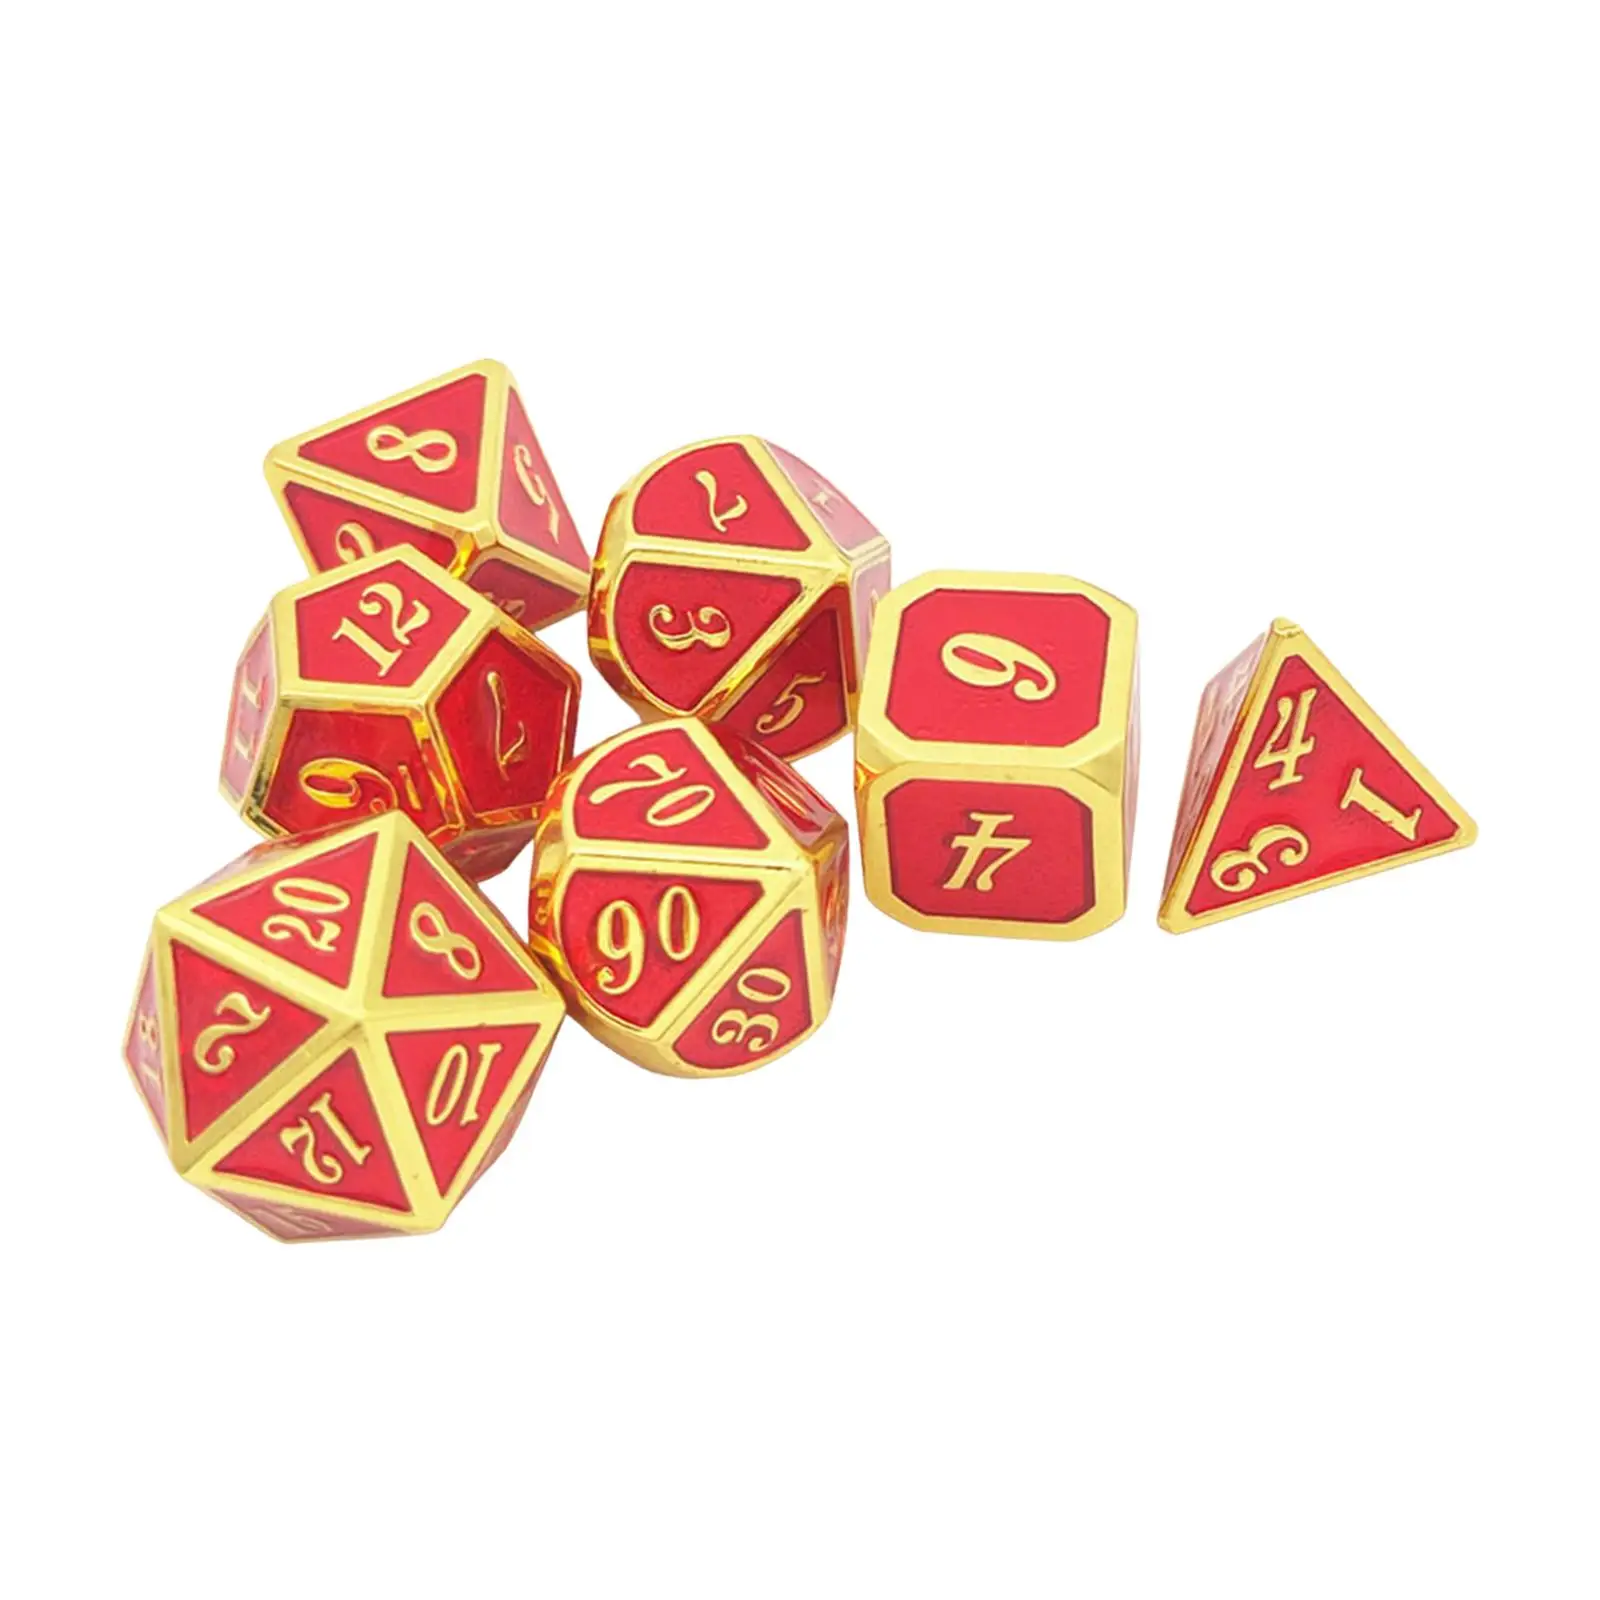 Metal Polyhedral Dice 7Pcs Set Portable Aluminum Alloy for Teaching Projects